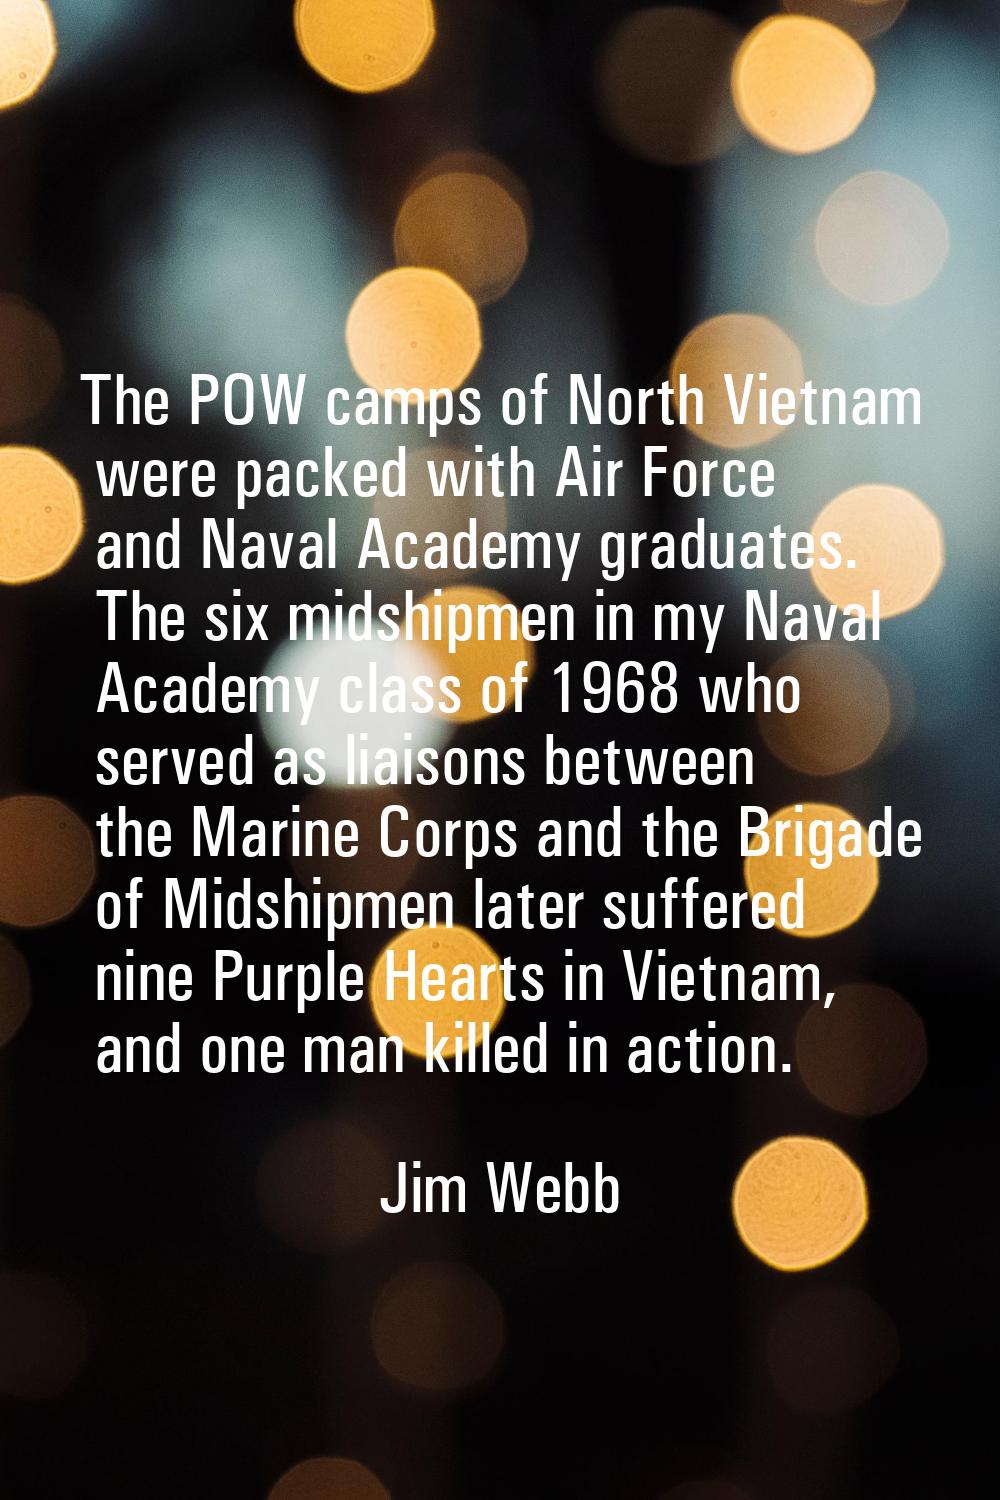 The POW camps of North Vietnam were packed with Air Force and Naval Academy graduates. The six mids